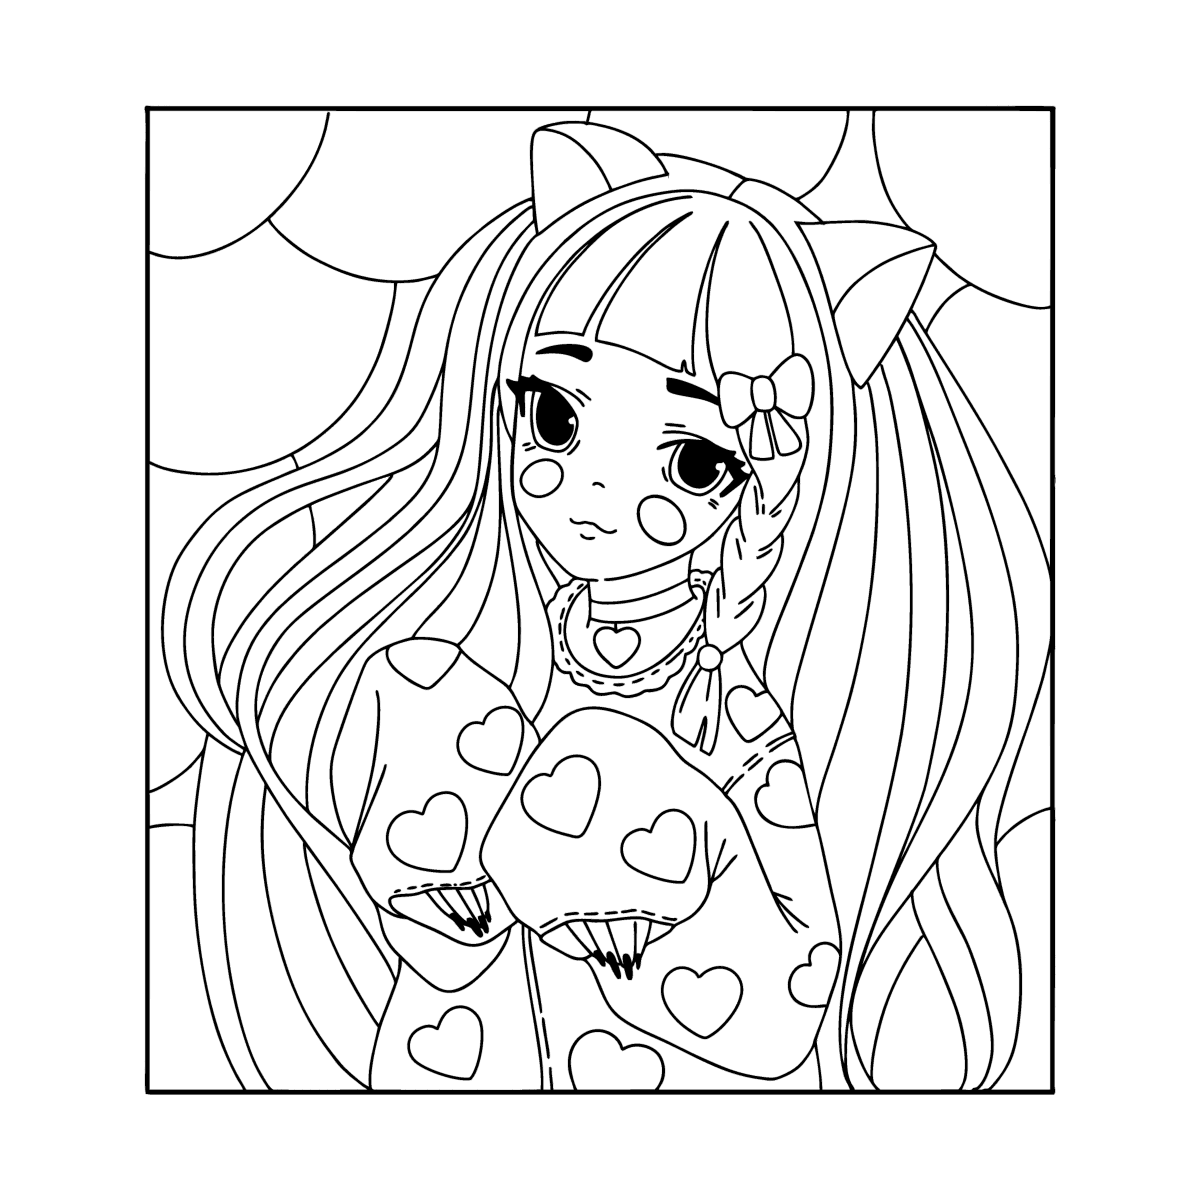 Anime girl with ears and paws coloring page ♥ Online and Print